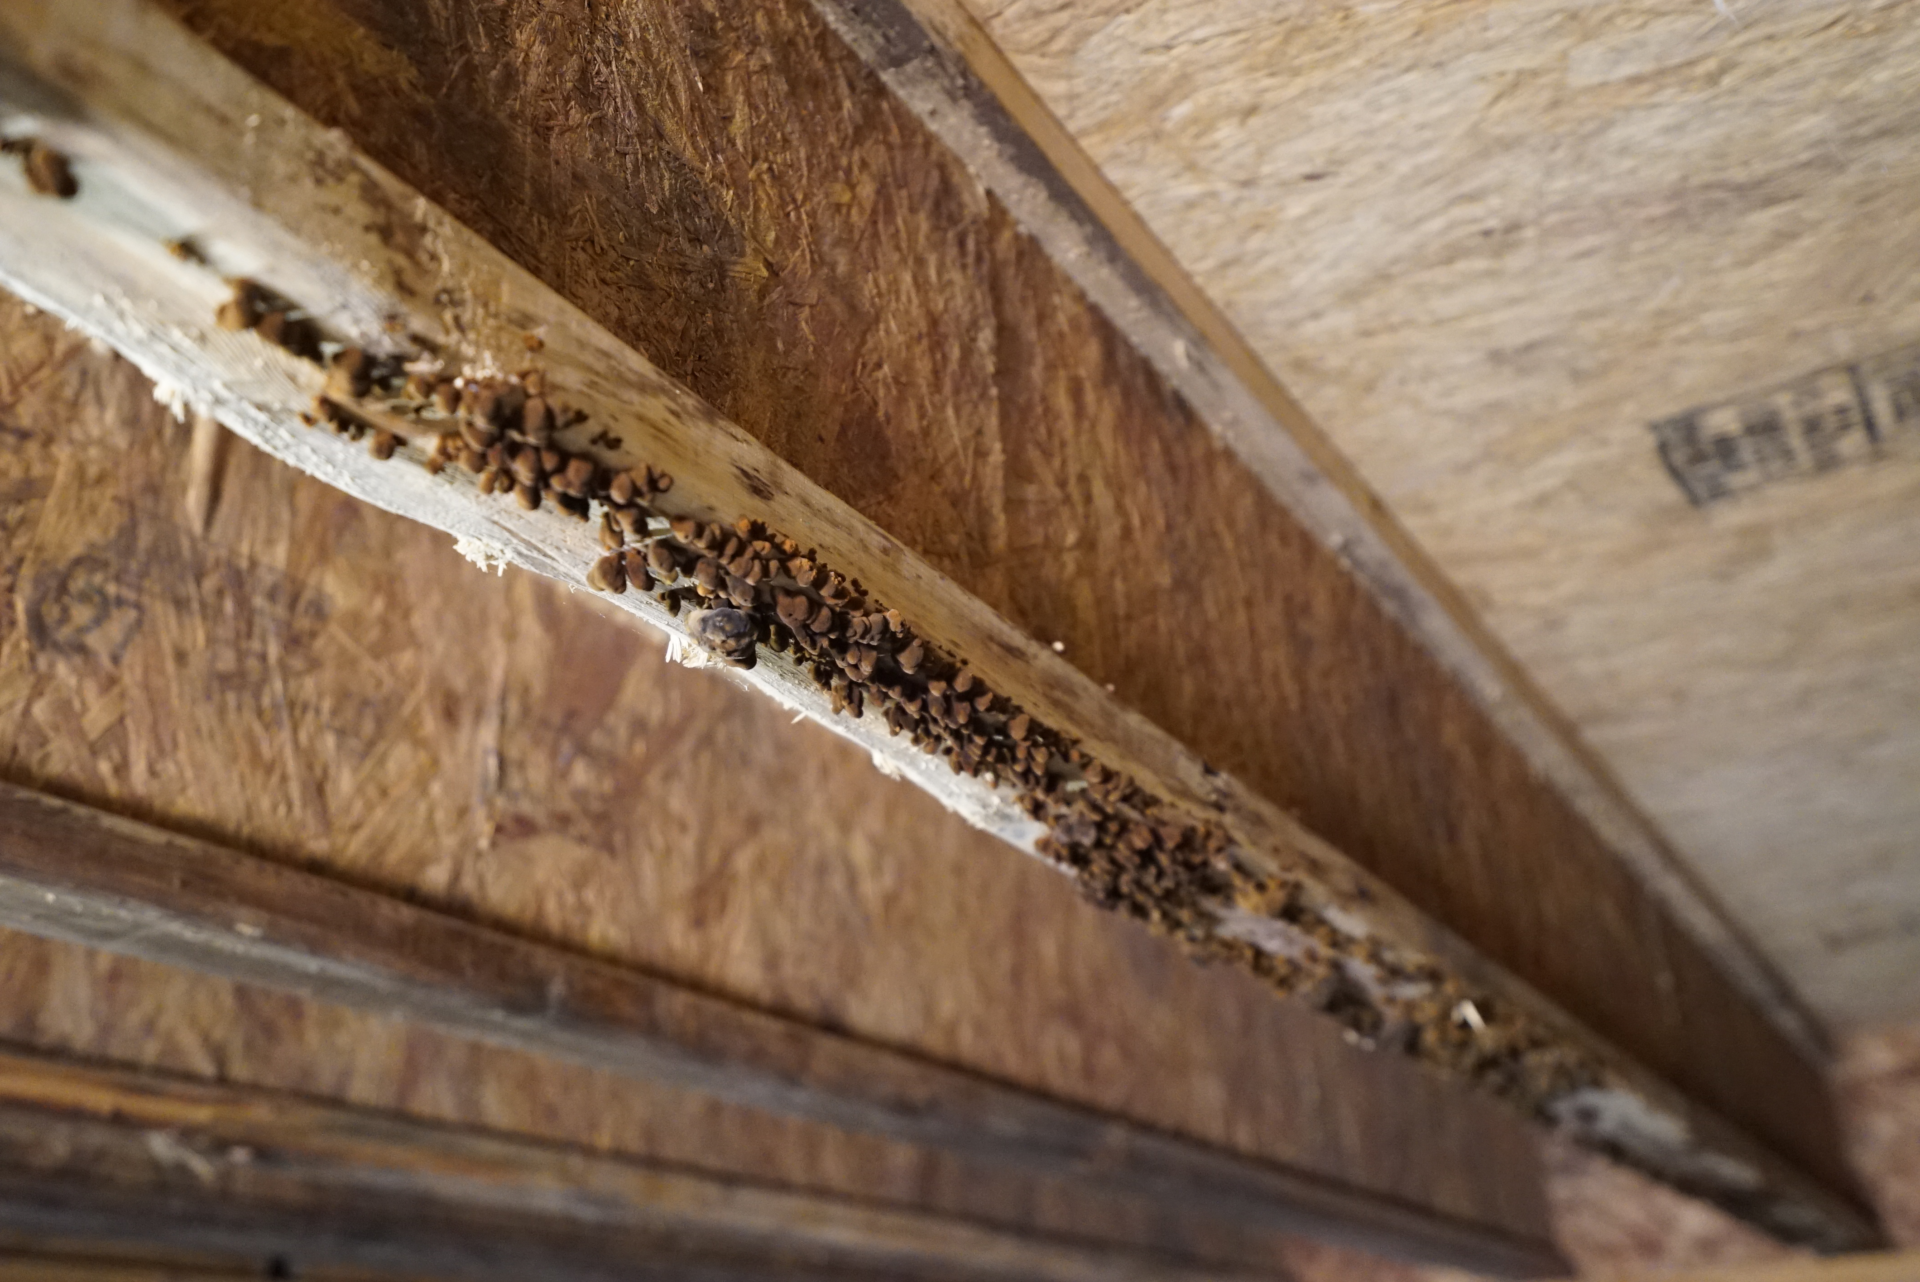 Are There Any Natural Or Eco-Friendly Methods To Remove Mold From Crawl Spaces Yourself?